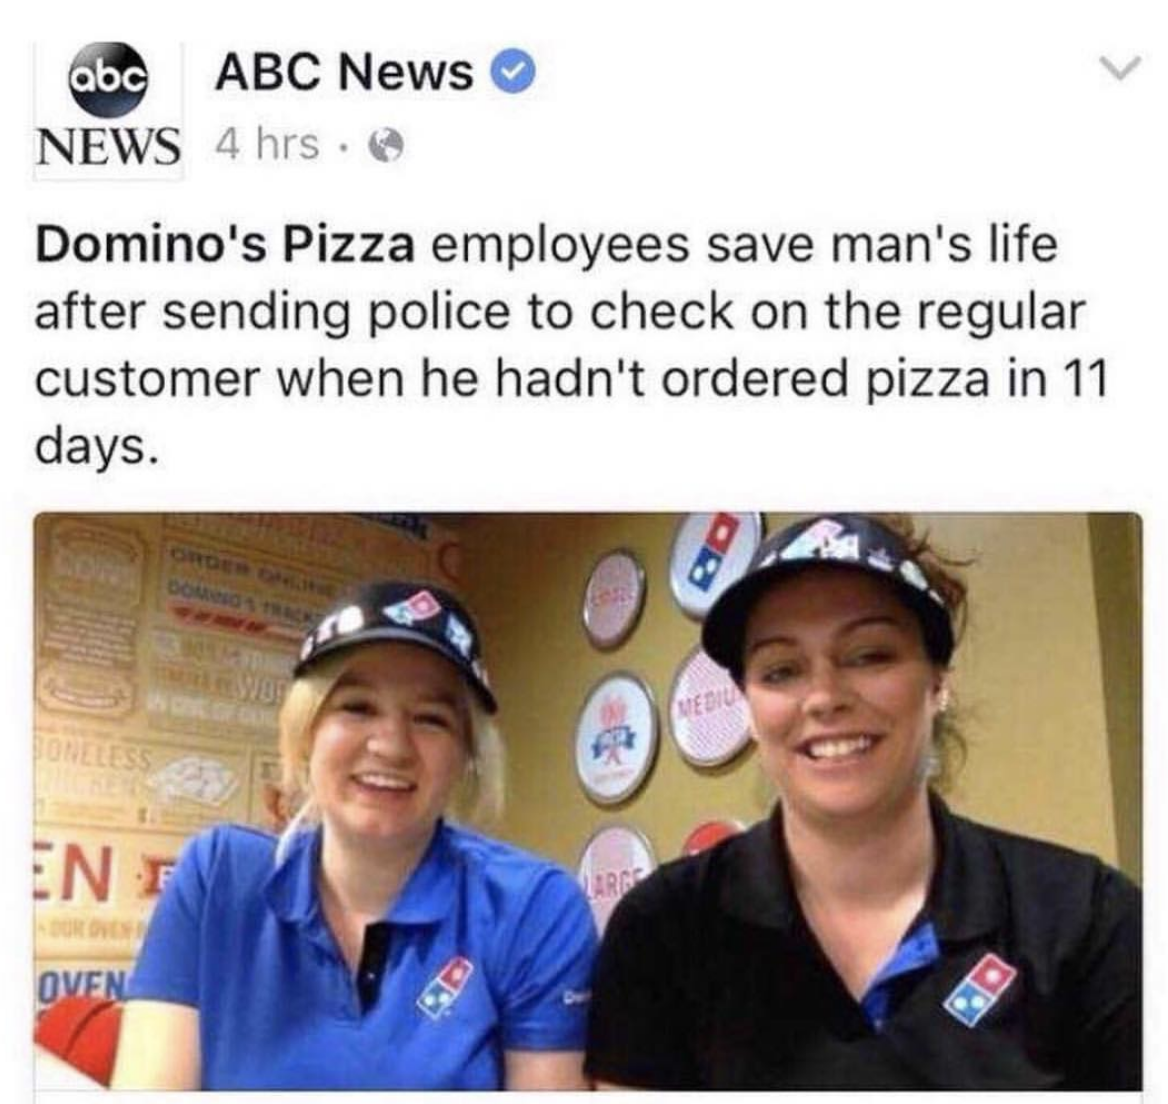 domino's employees - abc Abc News News 4 hrs. Domino's Pizza employees save man's life after sending police to check on the regular customer when he hadn't ordered pizza in 11 days. In Oven